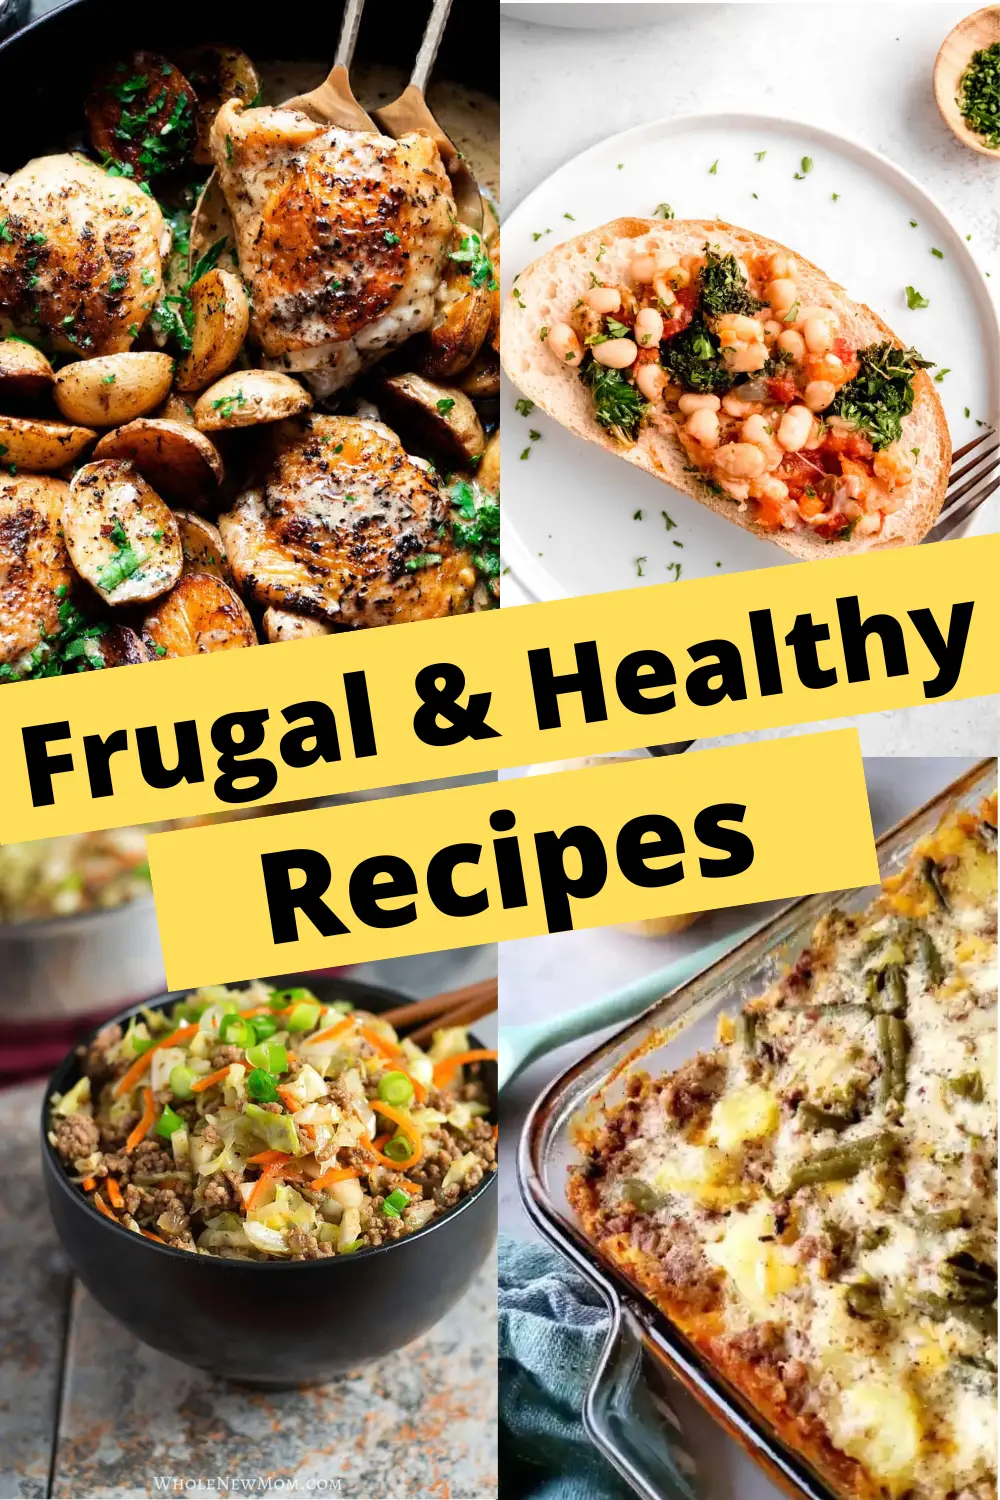 40+ Easy & Frugal Healthy Recipes You’ll Love